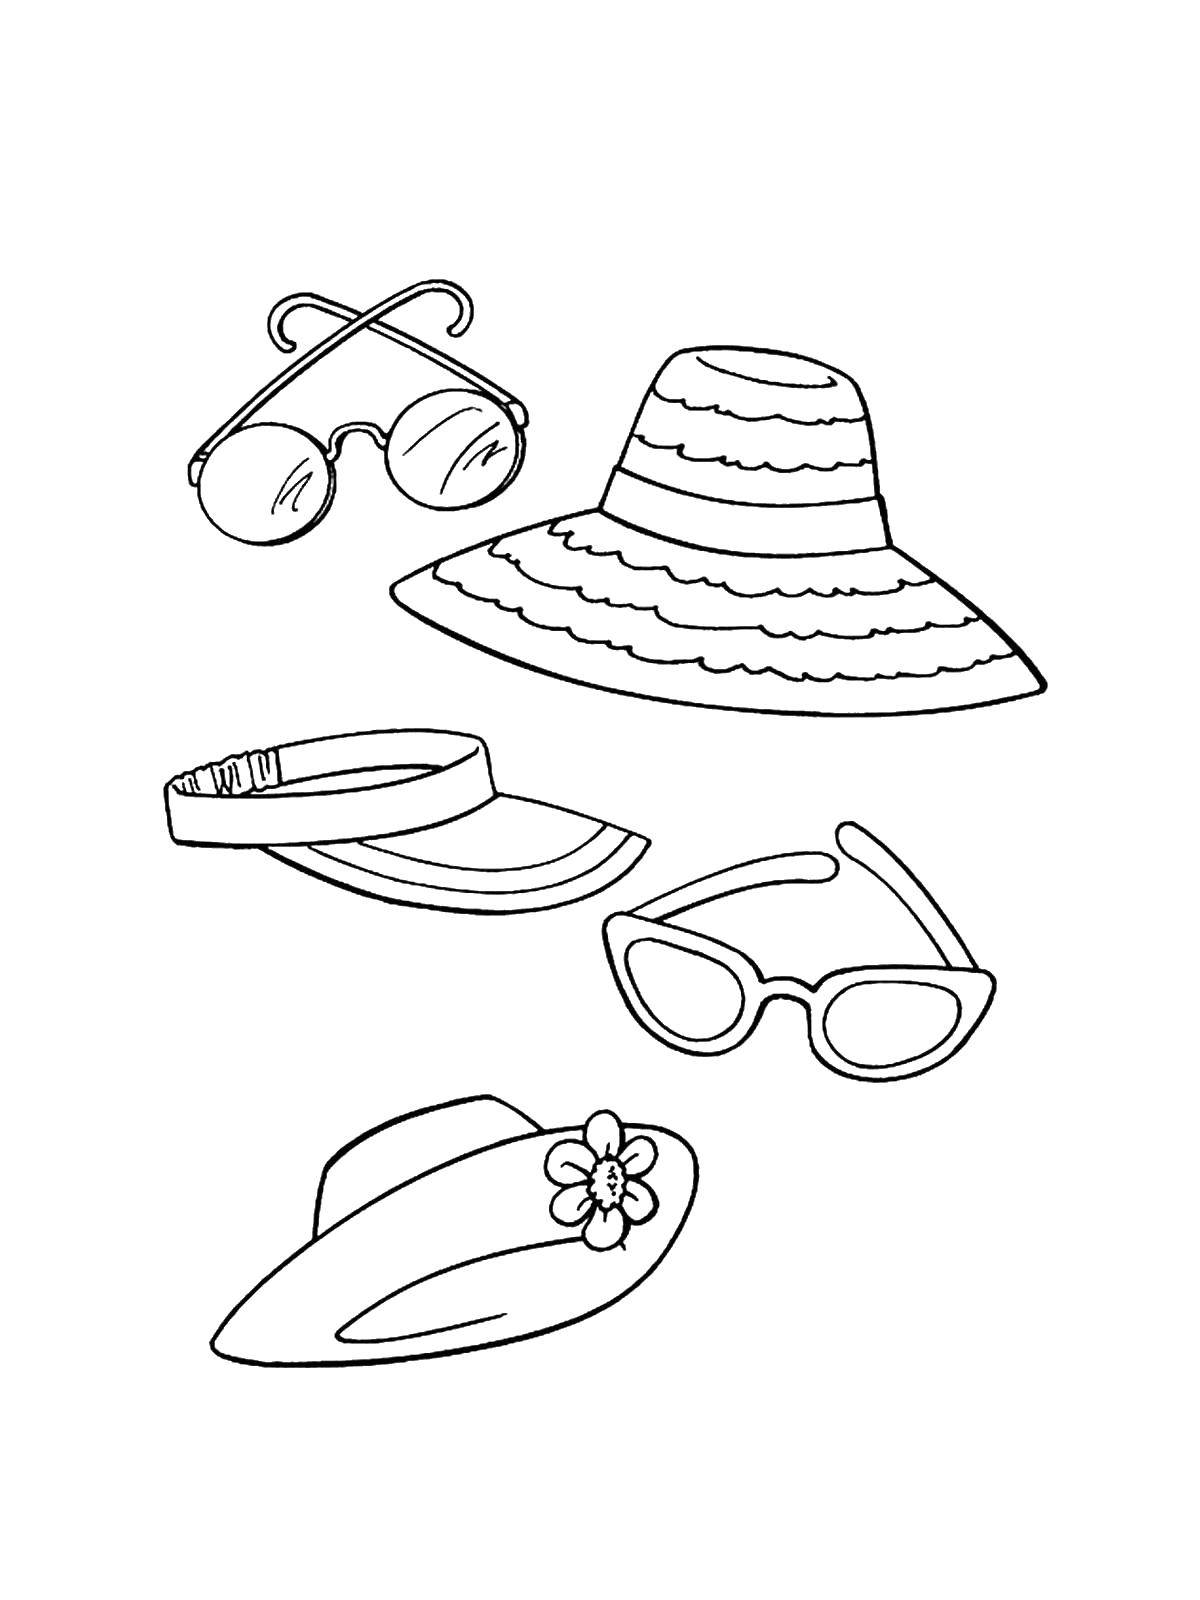 Coloring Beach accessories. Category clothing. Tags:  Clothing, beach, glasses, hats, visor.